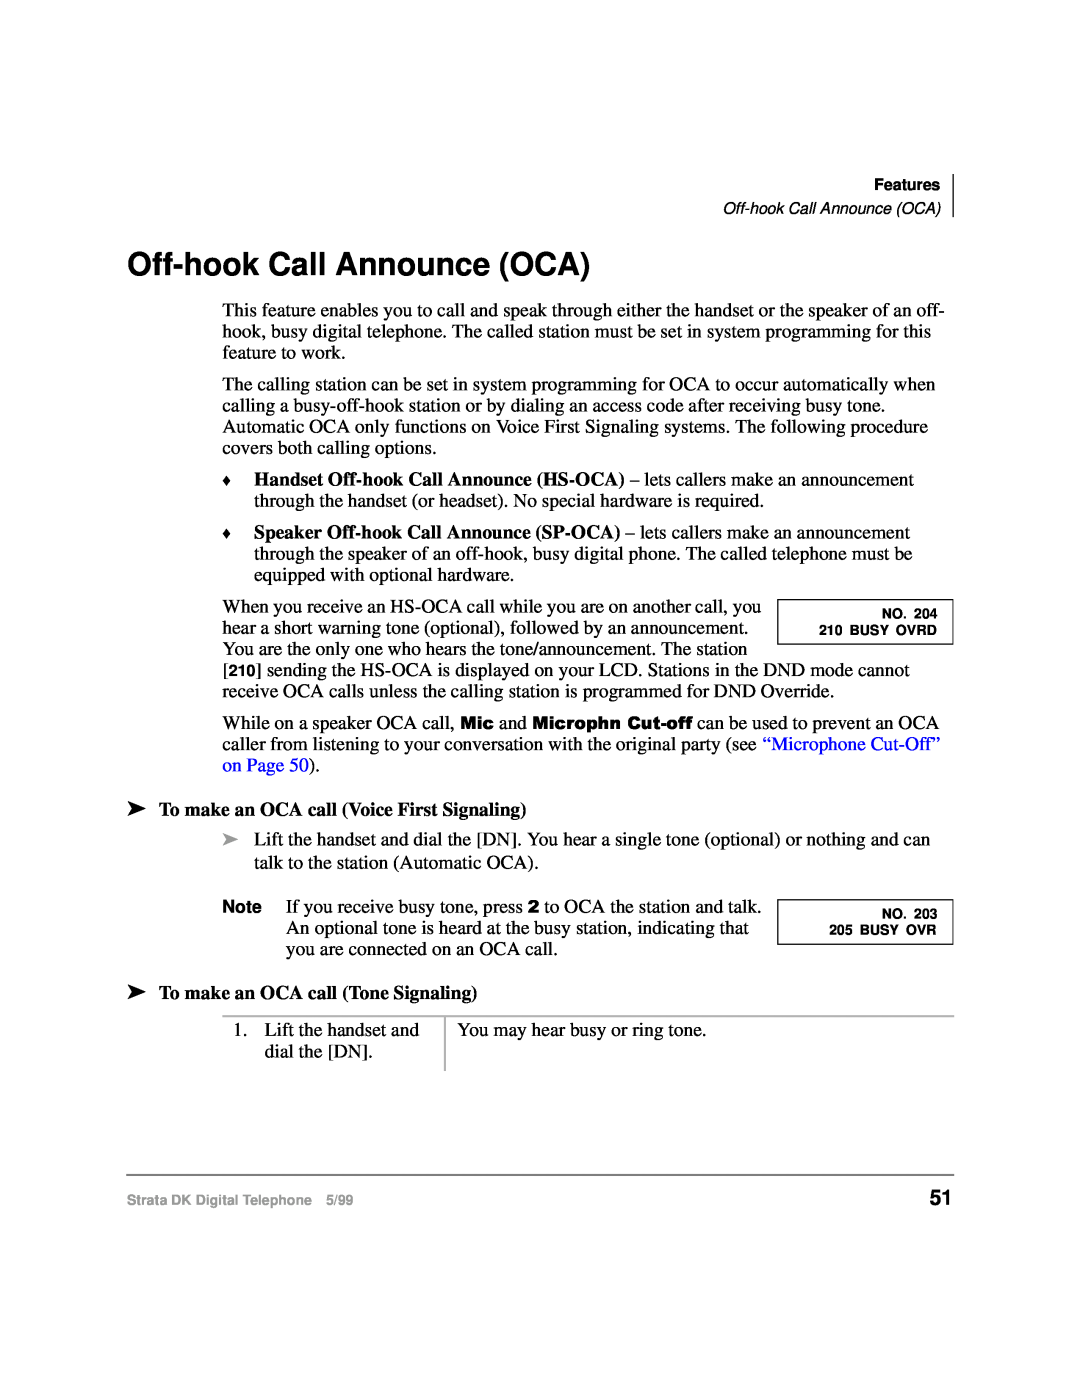 Toshiba CT manual Off-hook Call Announce OCA, To make an OCA call Voice First Signaling, To make an OCA call Tone Signaling 